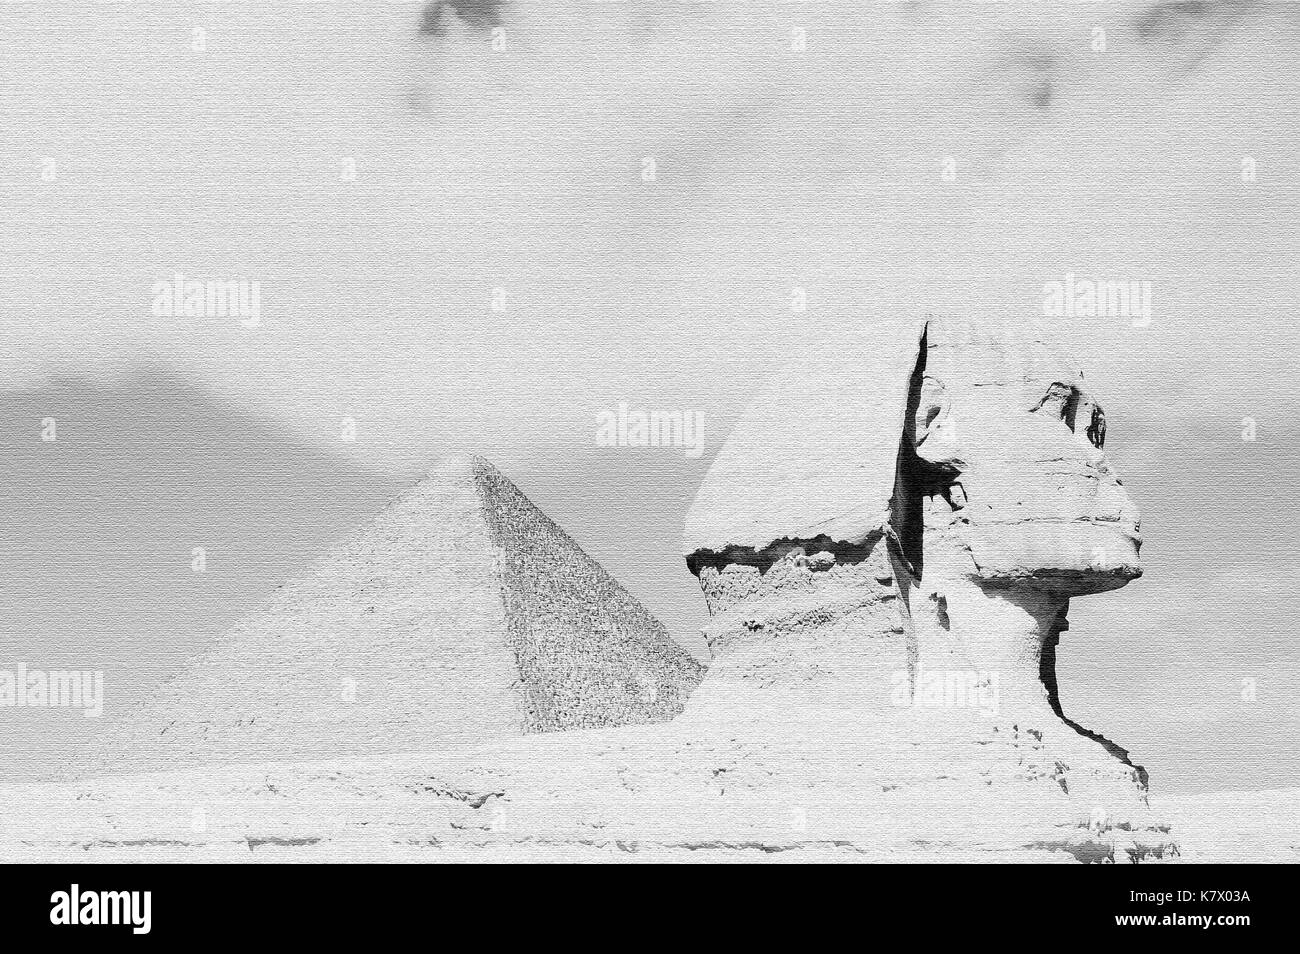 The Great Sphinx & Khufu Pyramid - Cairo (Texturized Canvas) Stock Photo